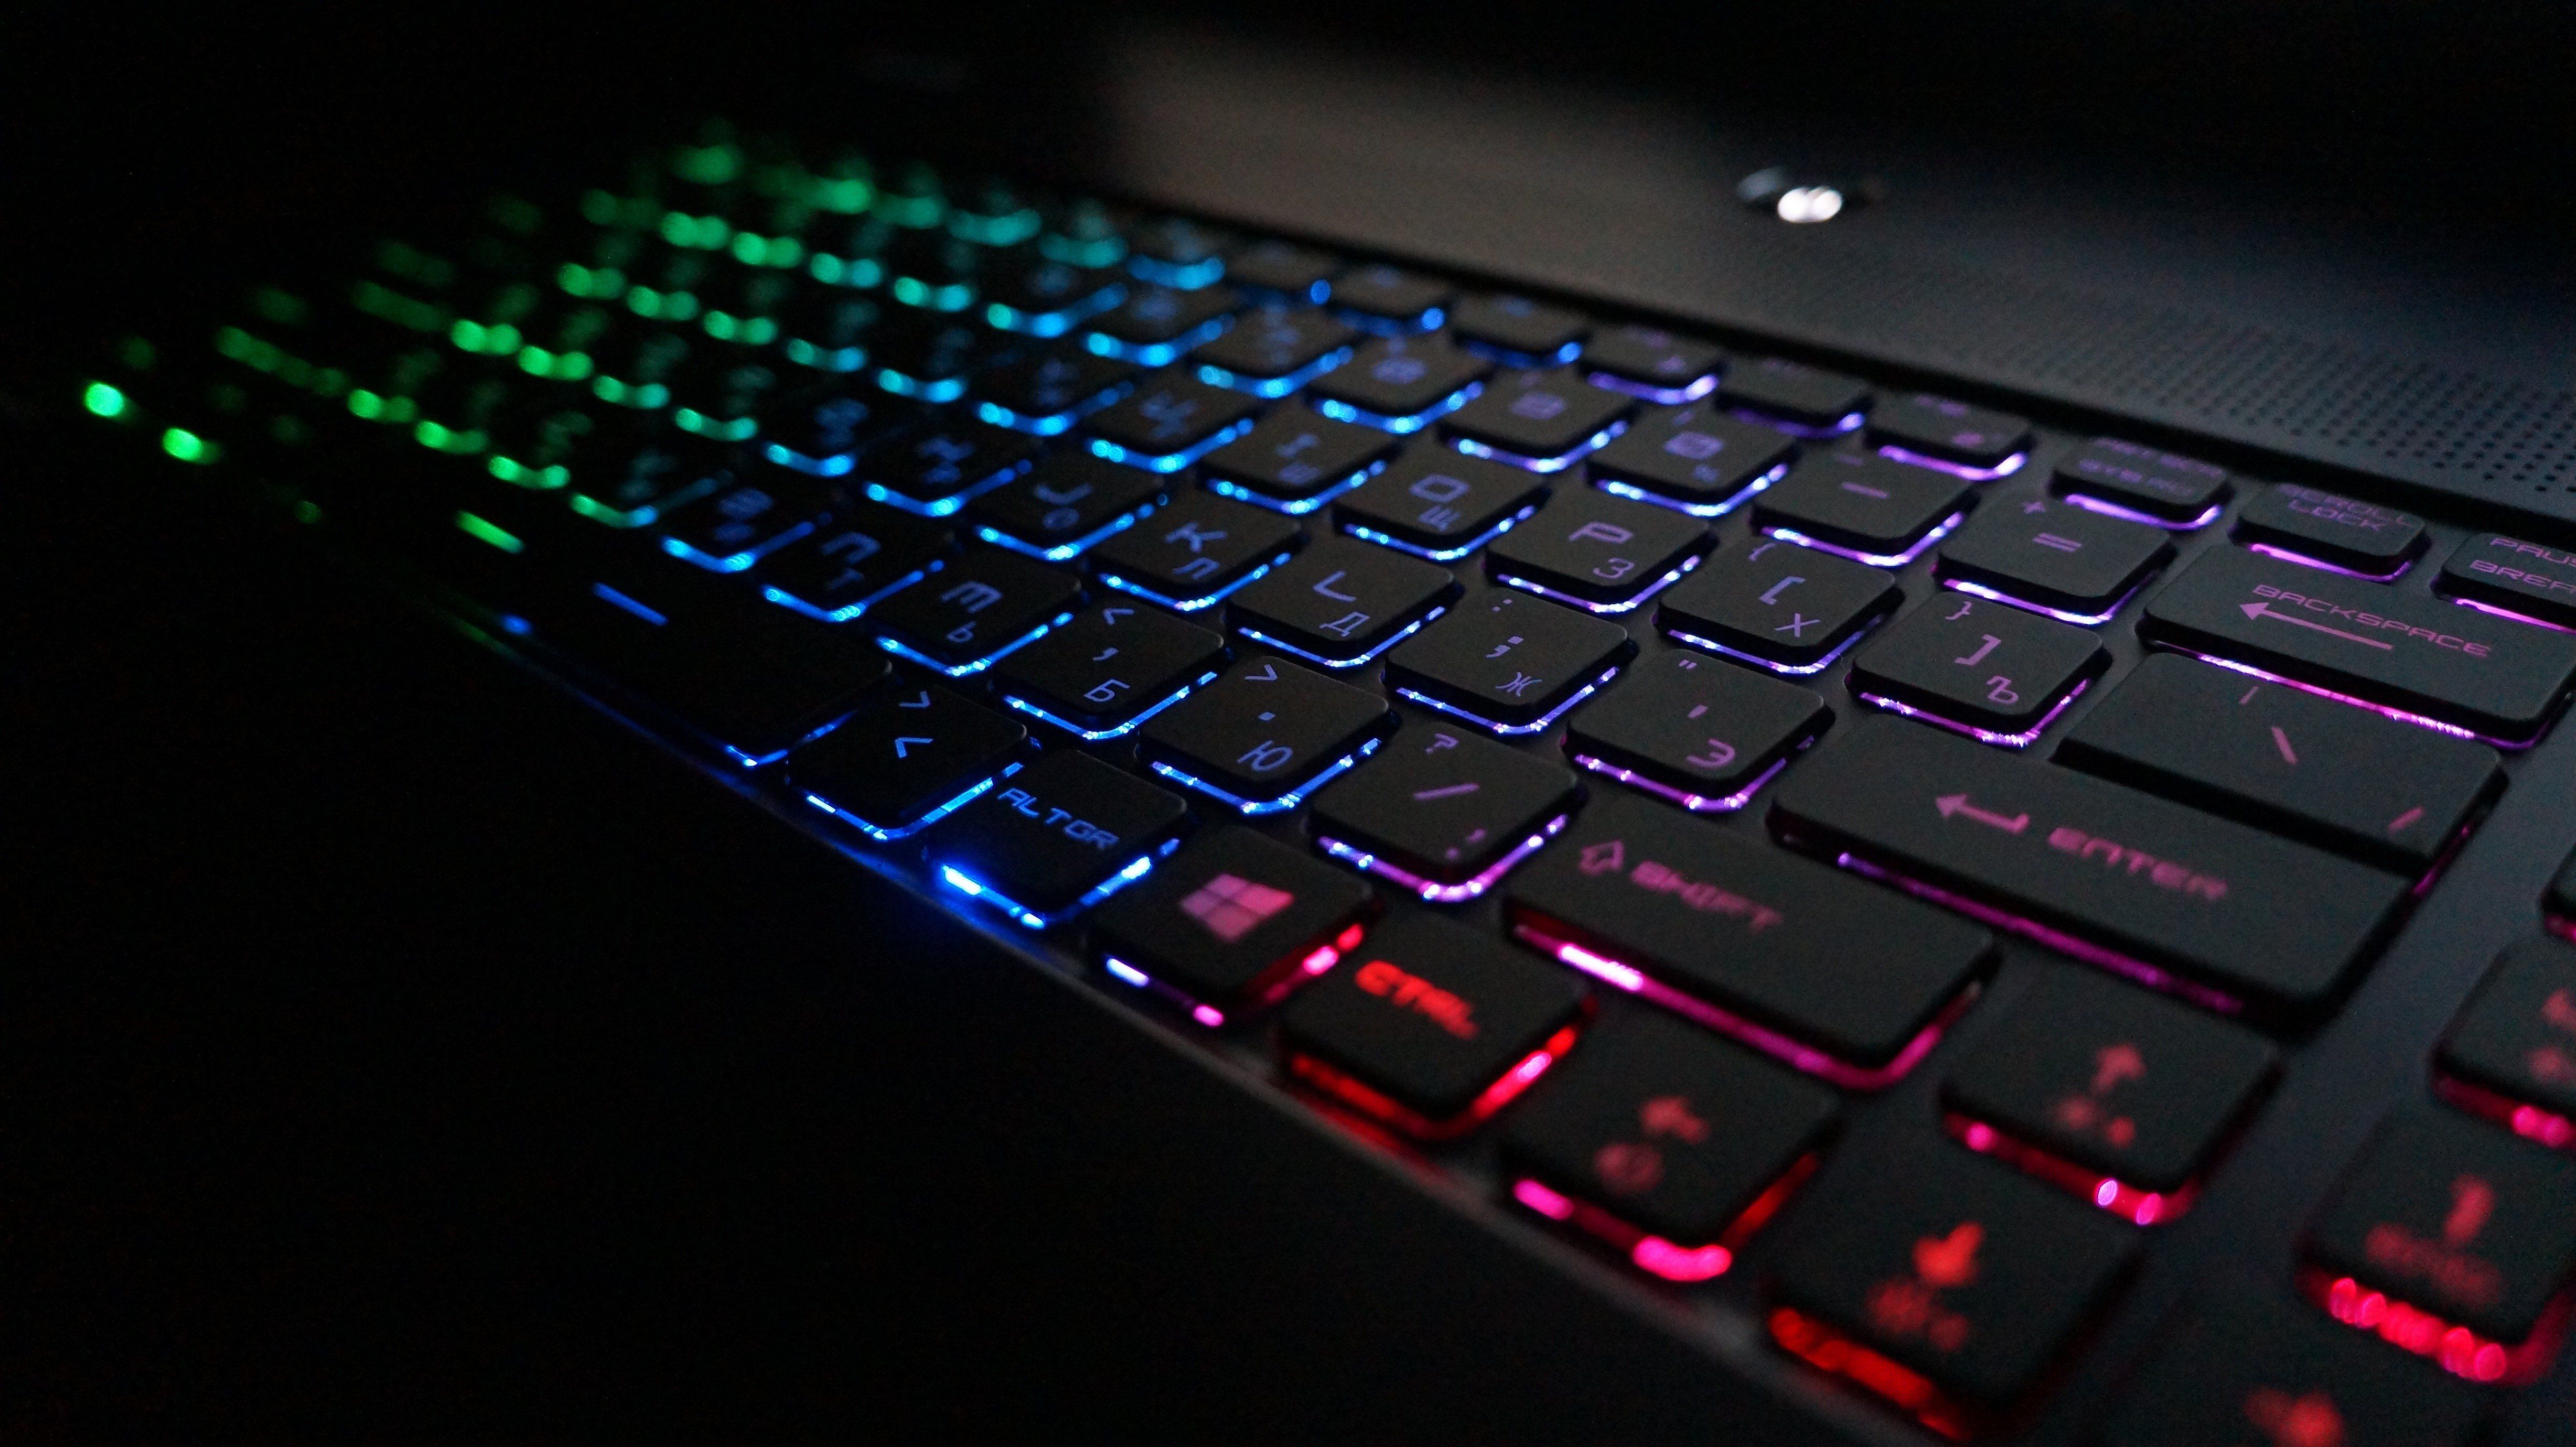 qwerty, Keyboards, Lights Wallpaper HD / Desktop and Mobile